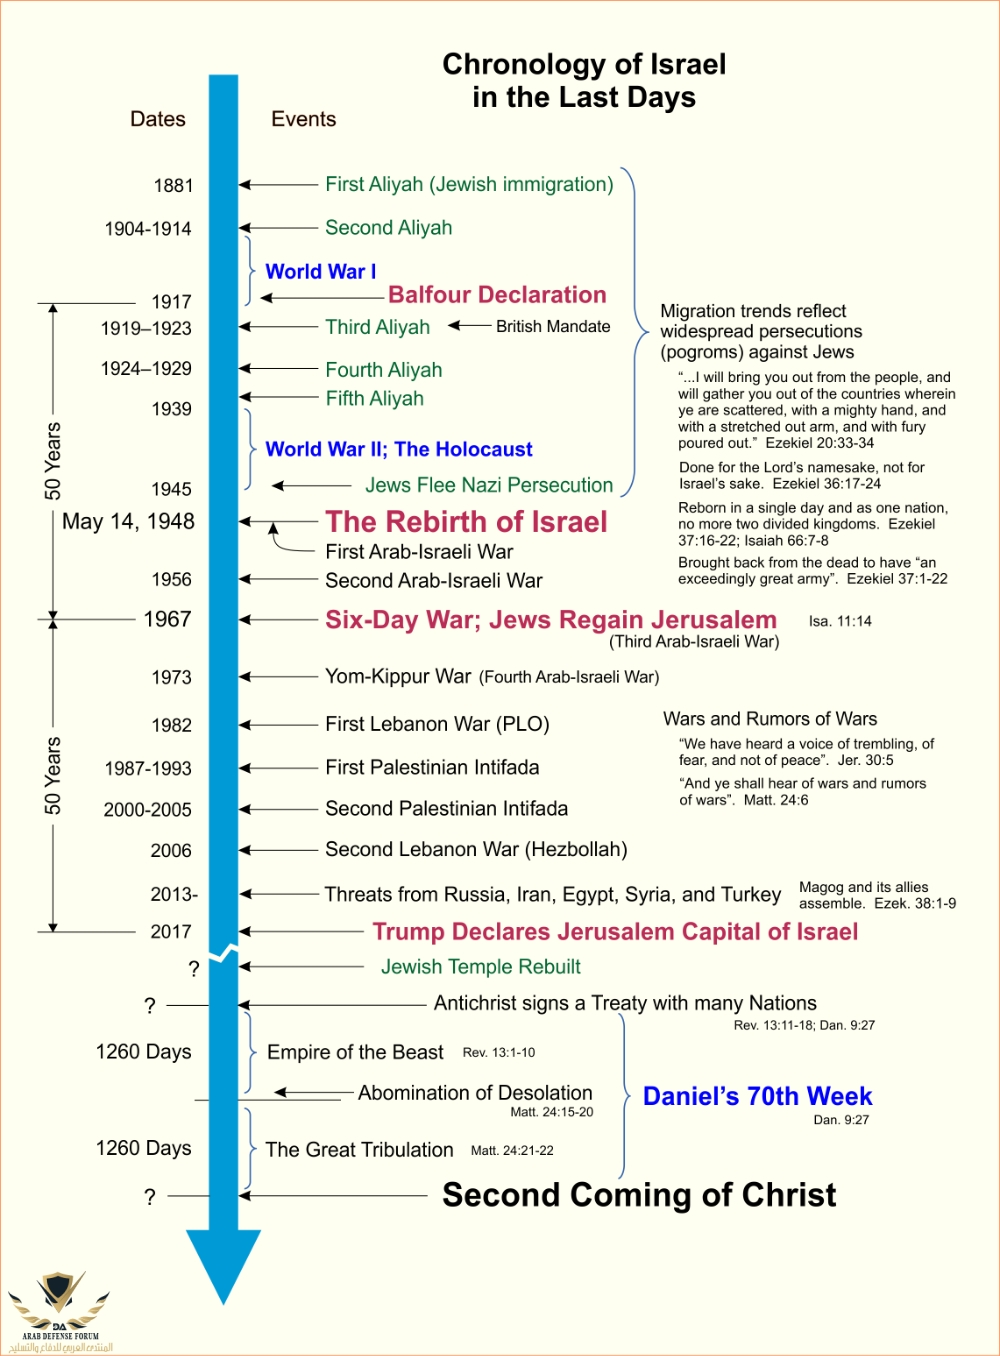 Chronology-of-Israel-in-the-Last-Days-11.jpg